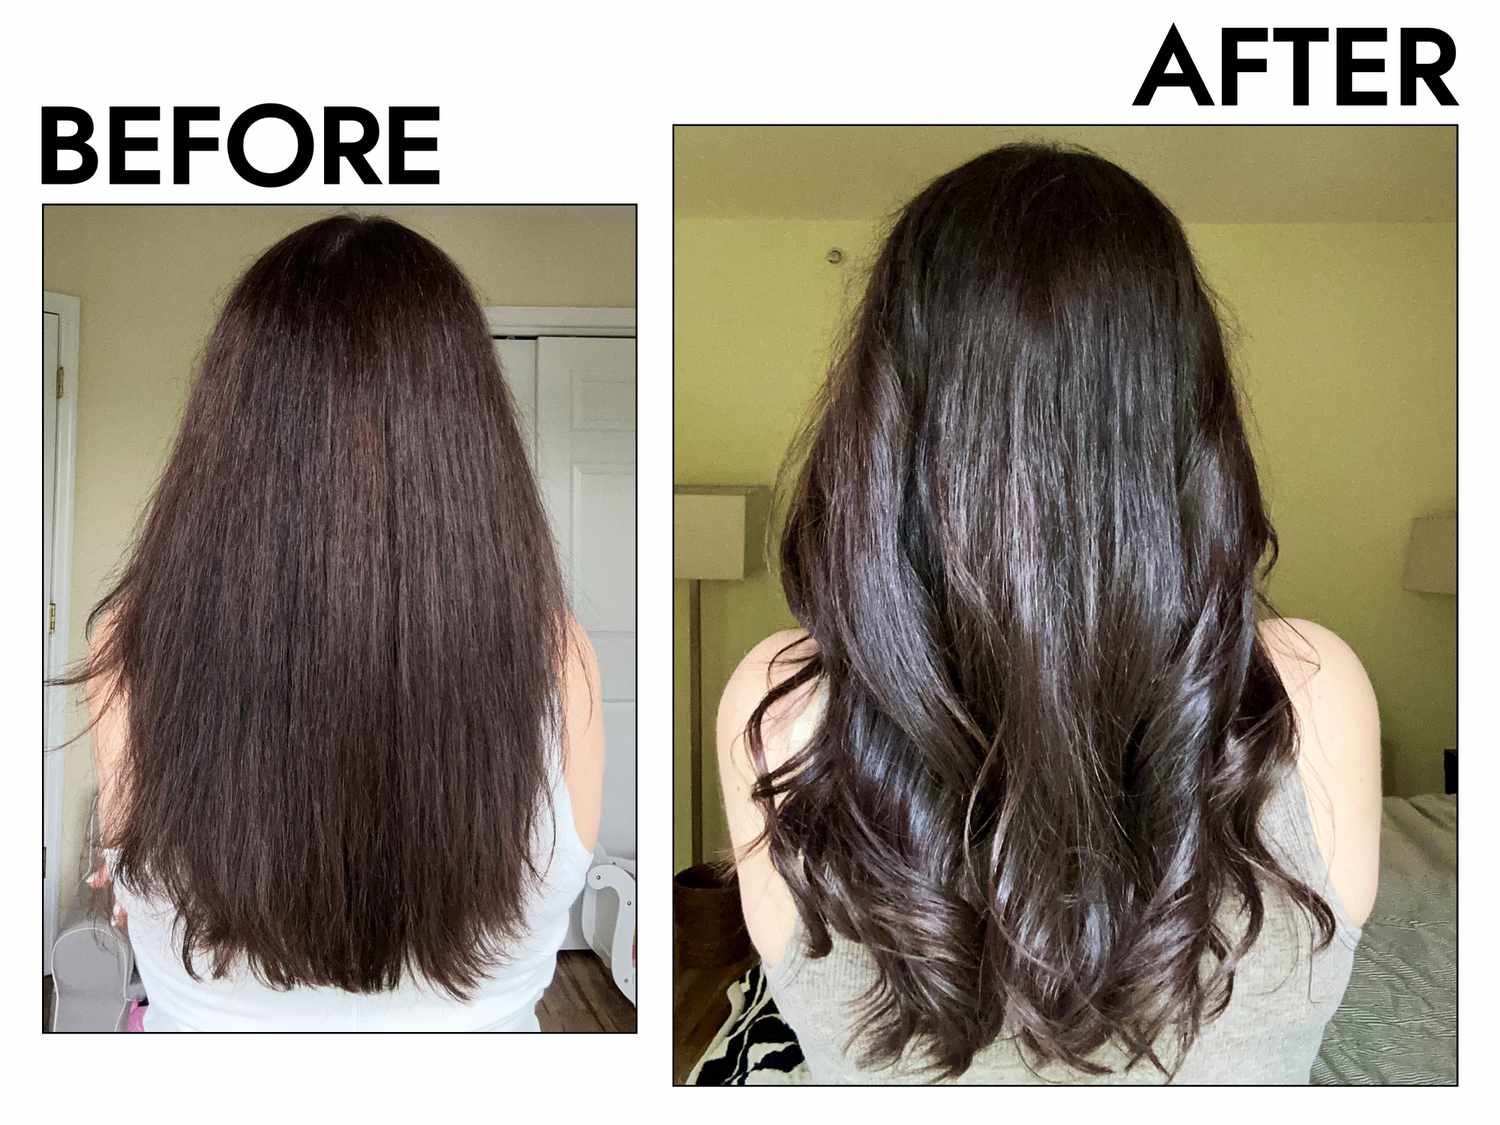 A person's hair before and after styling with the KÃ©rastase Genesis Heat Protecting Leave-In Treatment for Weakened Hair